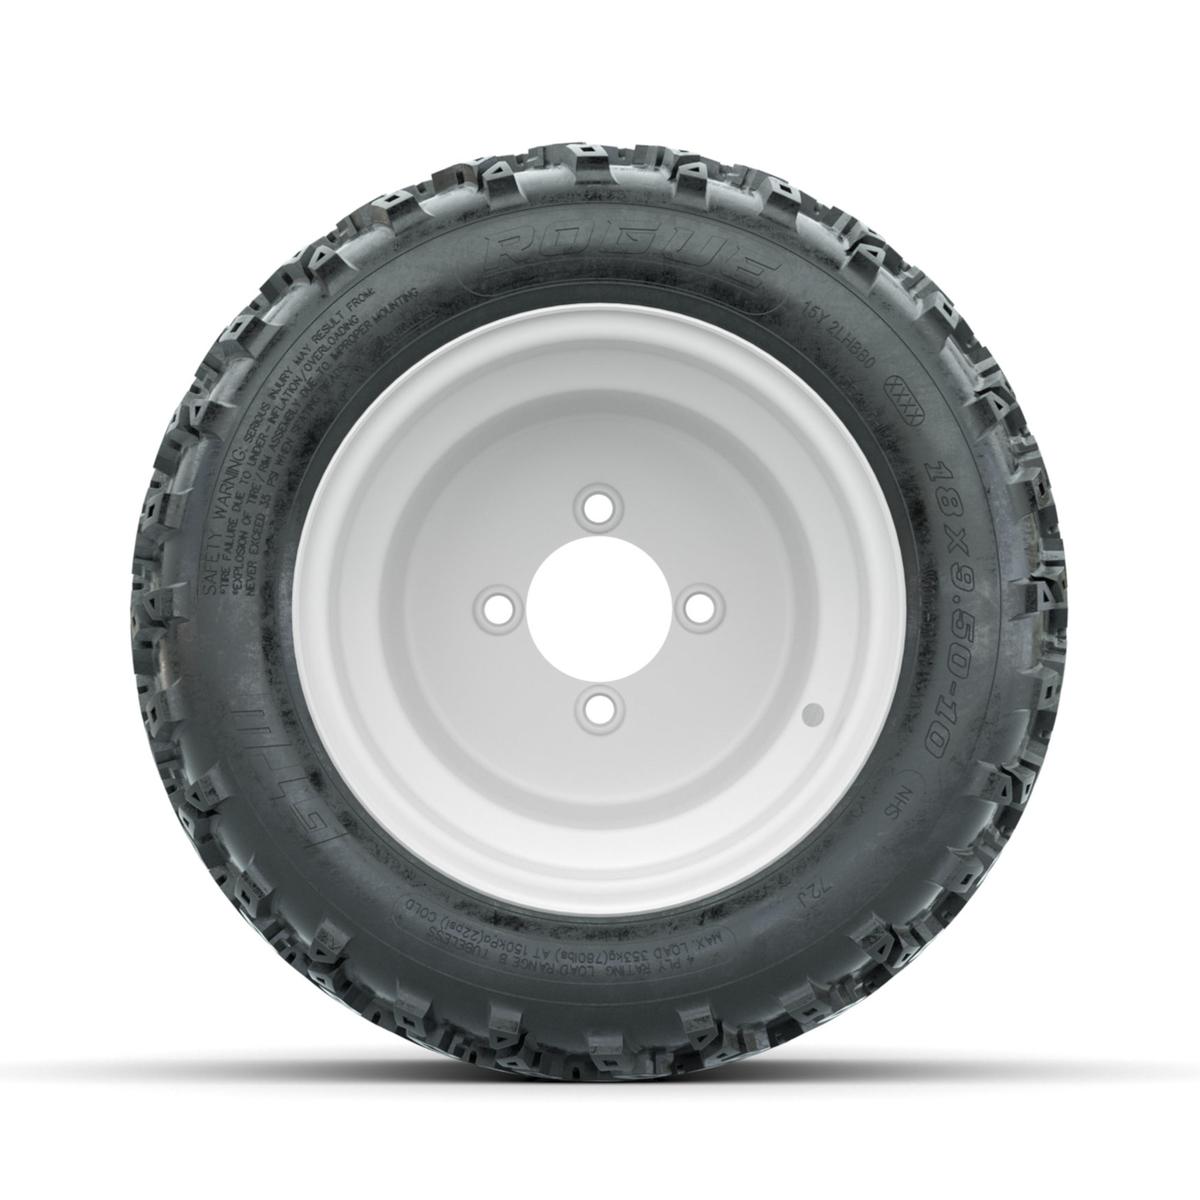 GTW Steel White 3:5 Offset 10 in Wheels with 18x9.50-10 Rogue All Terrain Tires – Full Set